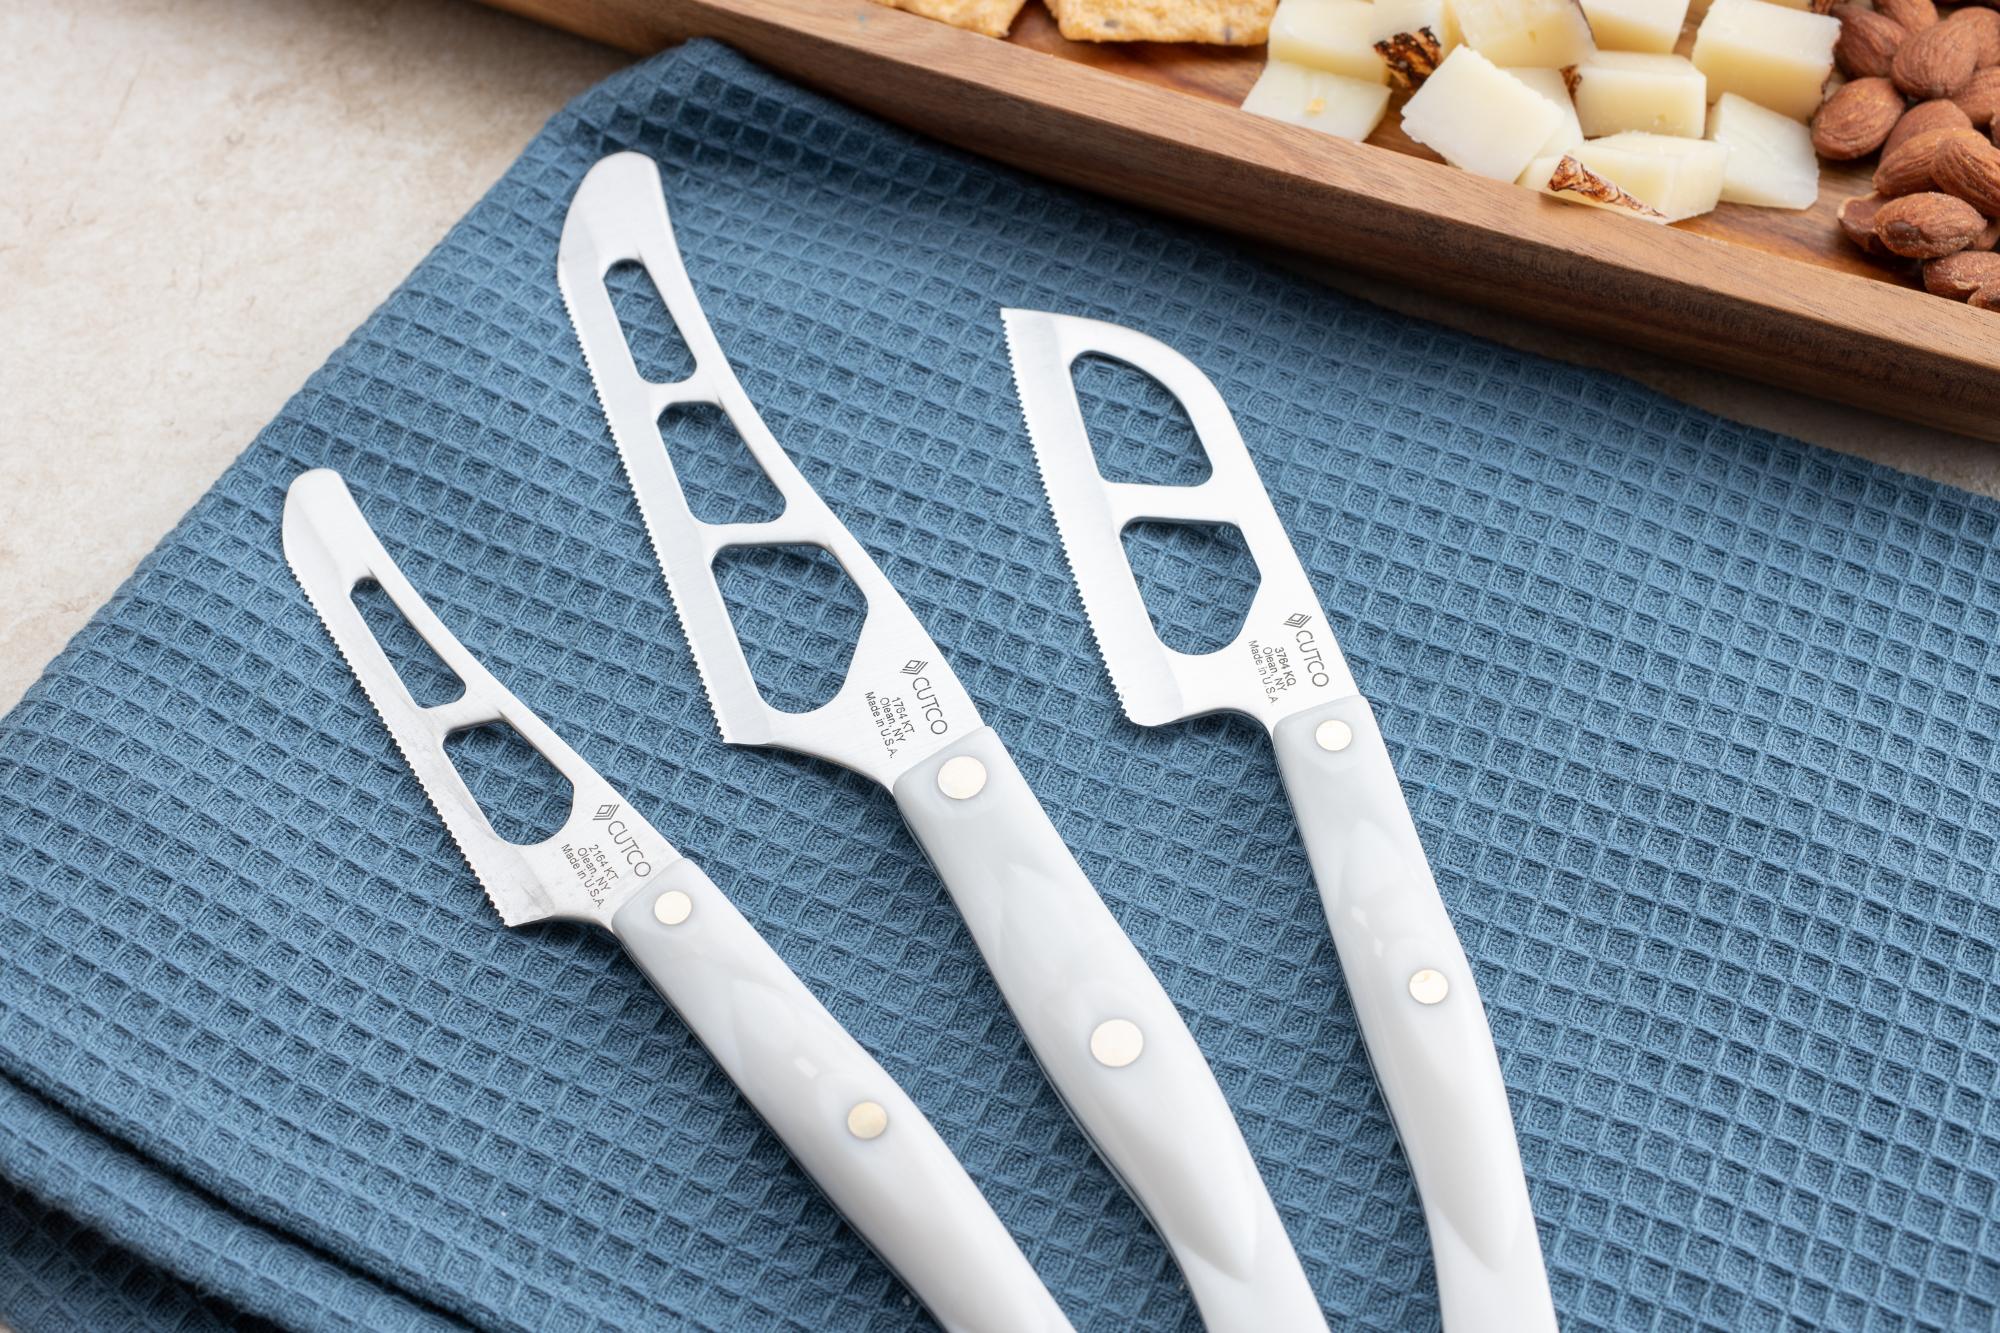 Cheese knives laid out.